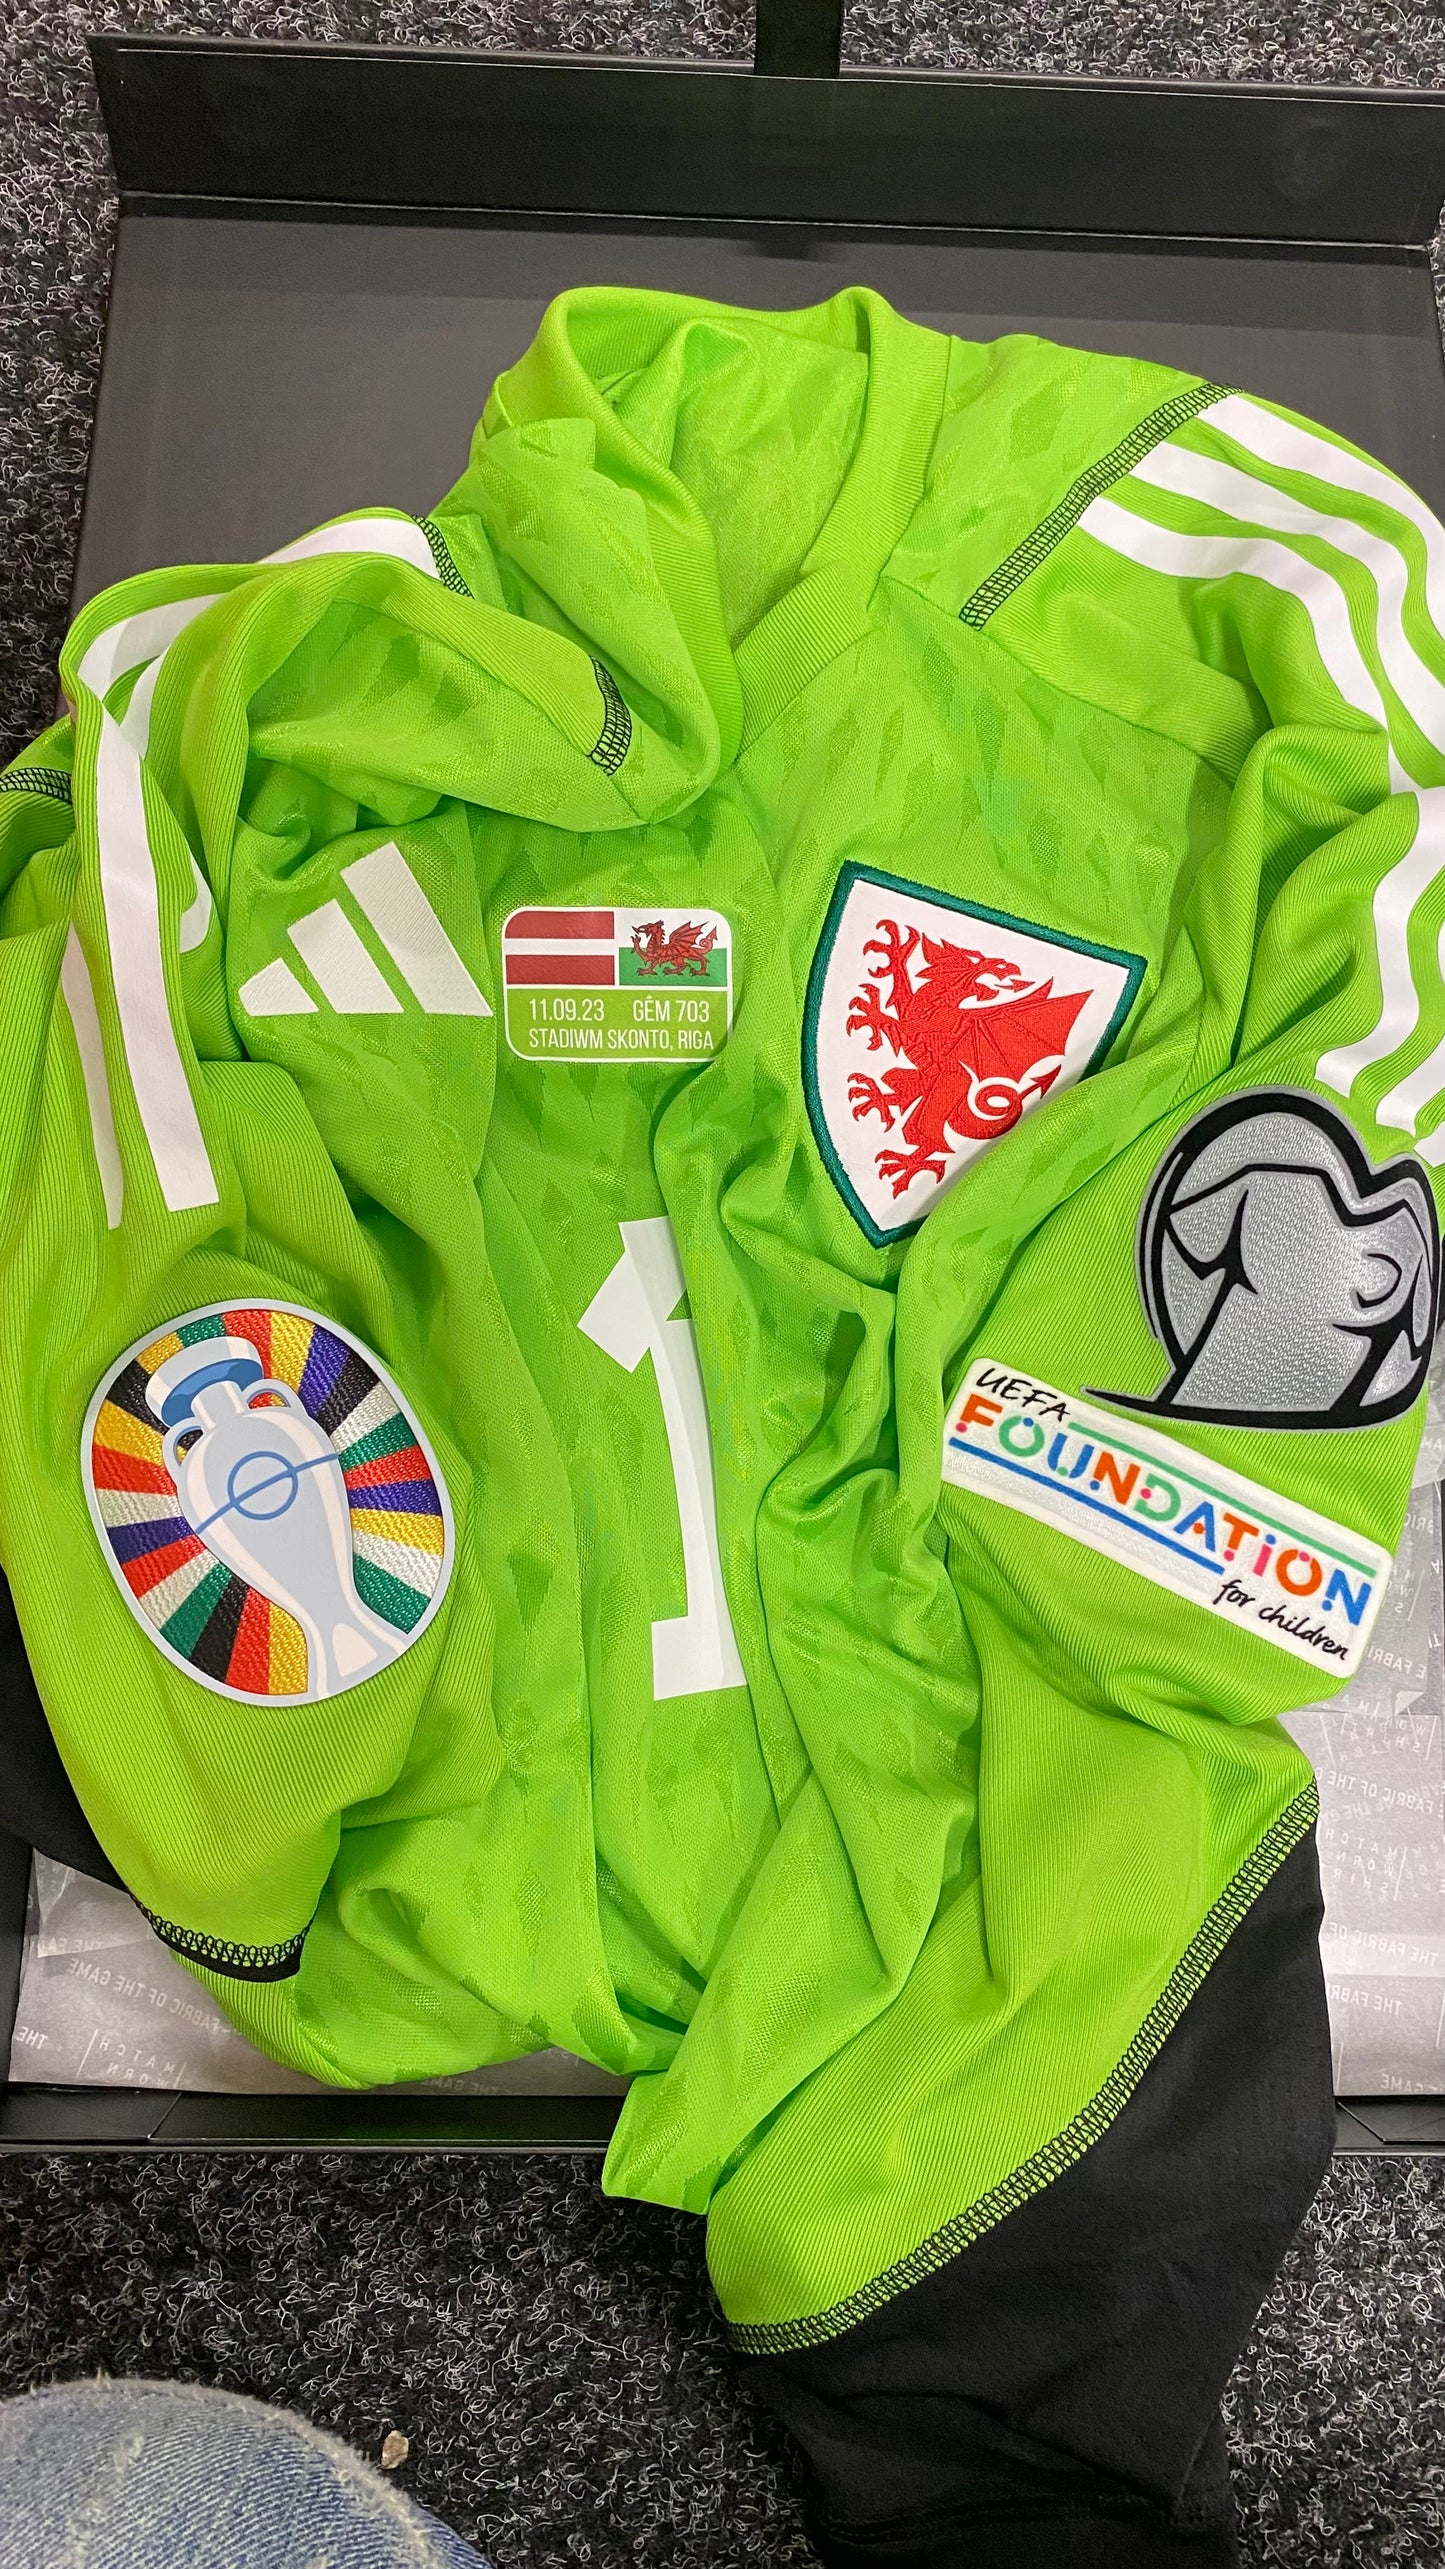 Boxed Match Worn + Signed King Wales GK Shirt